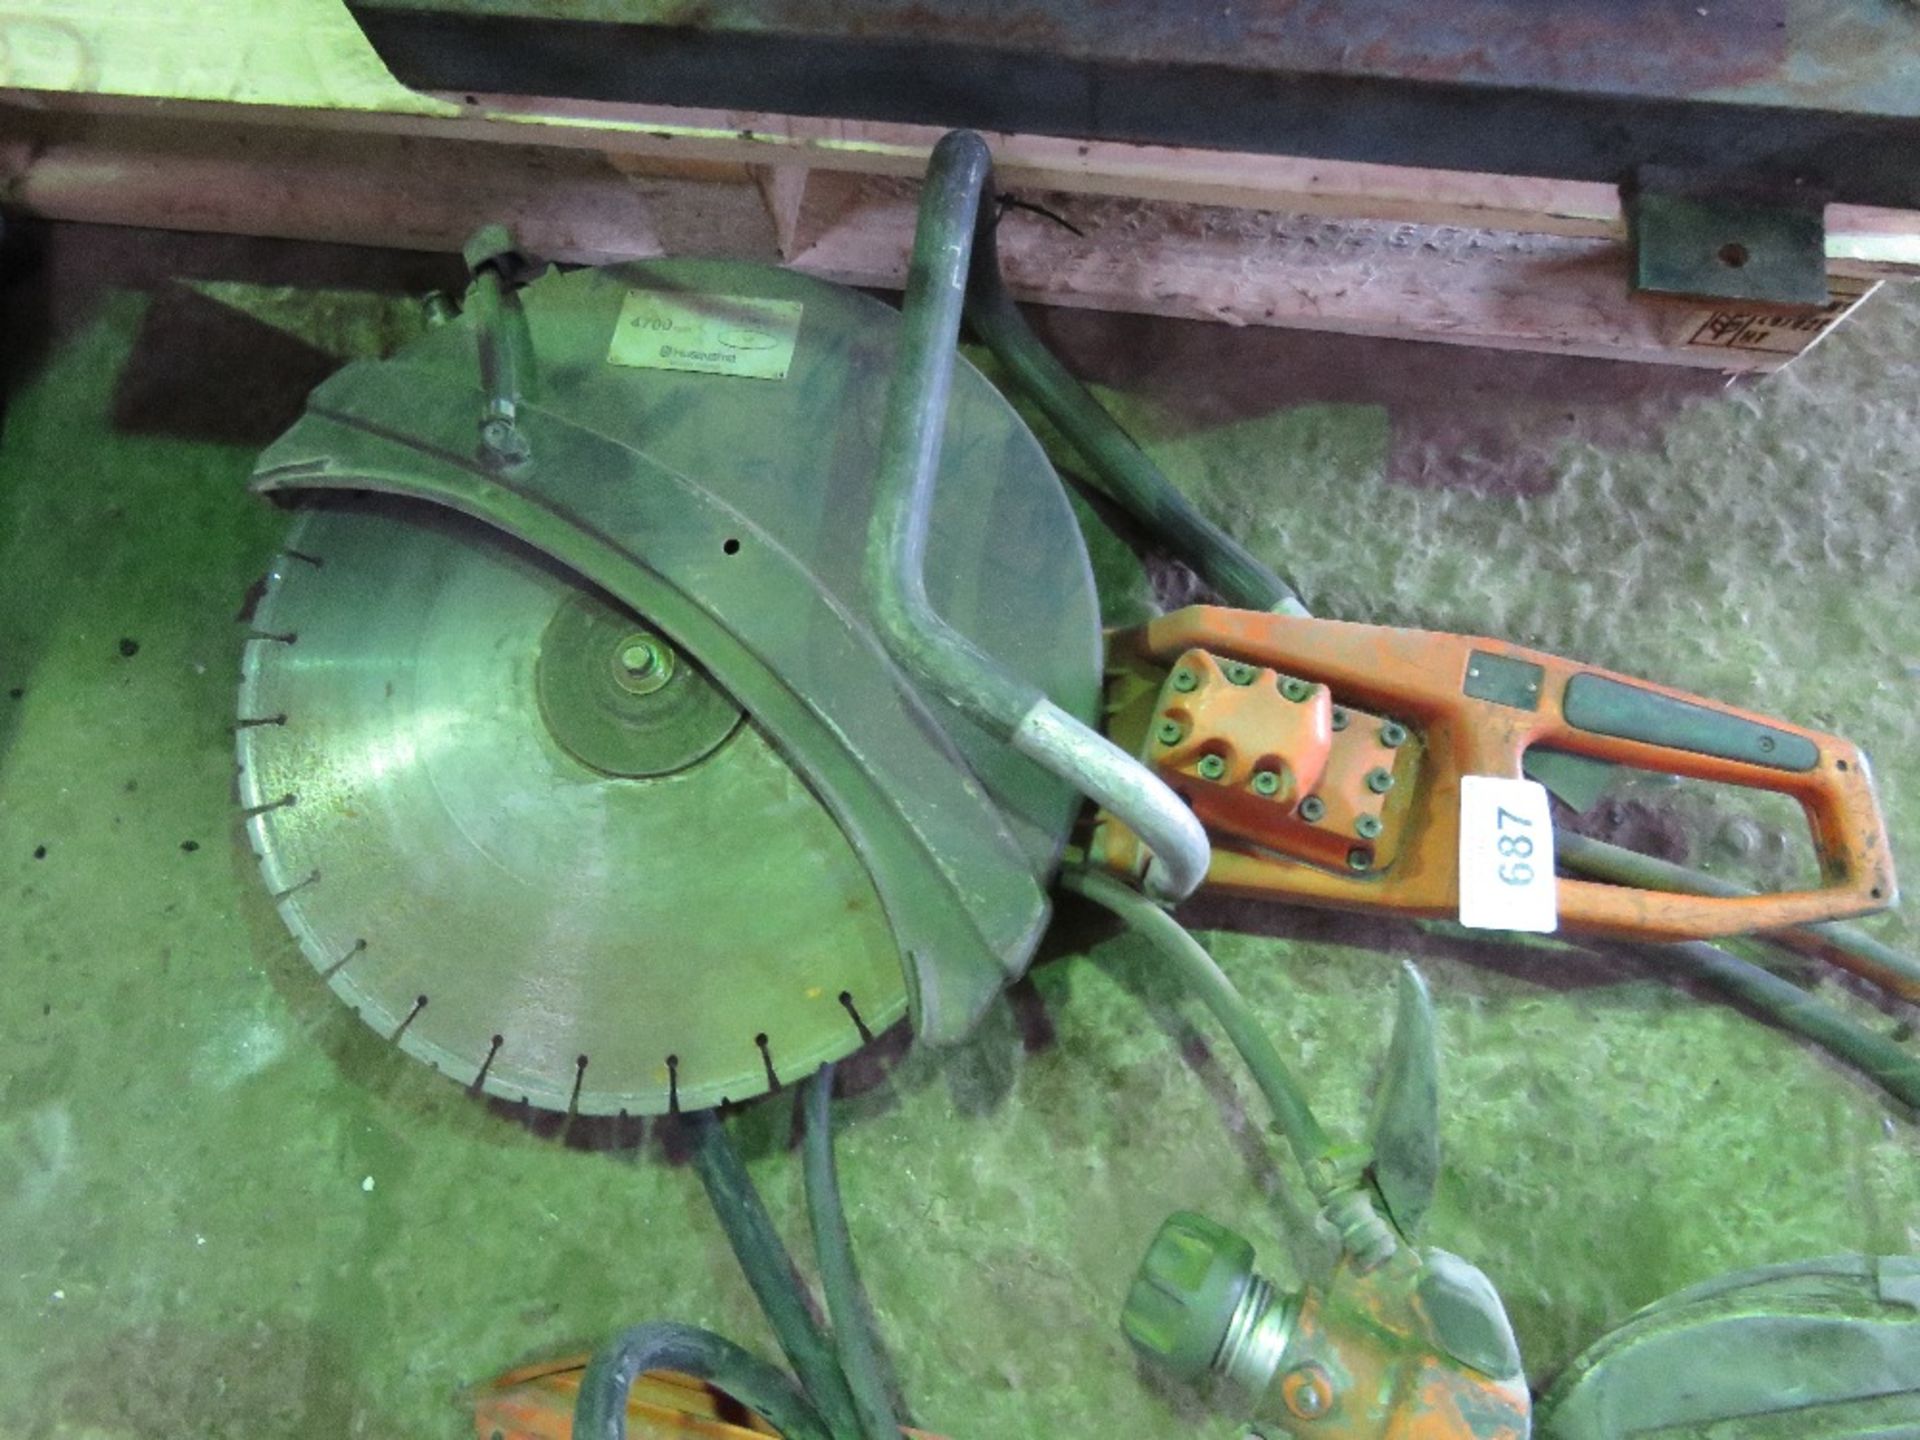 2 X HUSQVARNA HYDRAULIC DRIVEN SAWS: DISC CUTTER AND A RING SAW. - Image 5 of 6